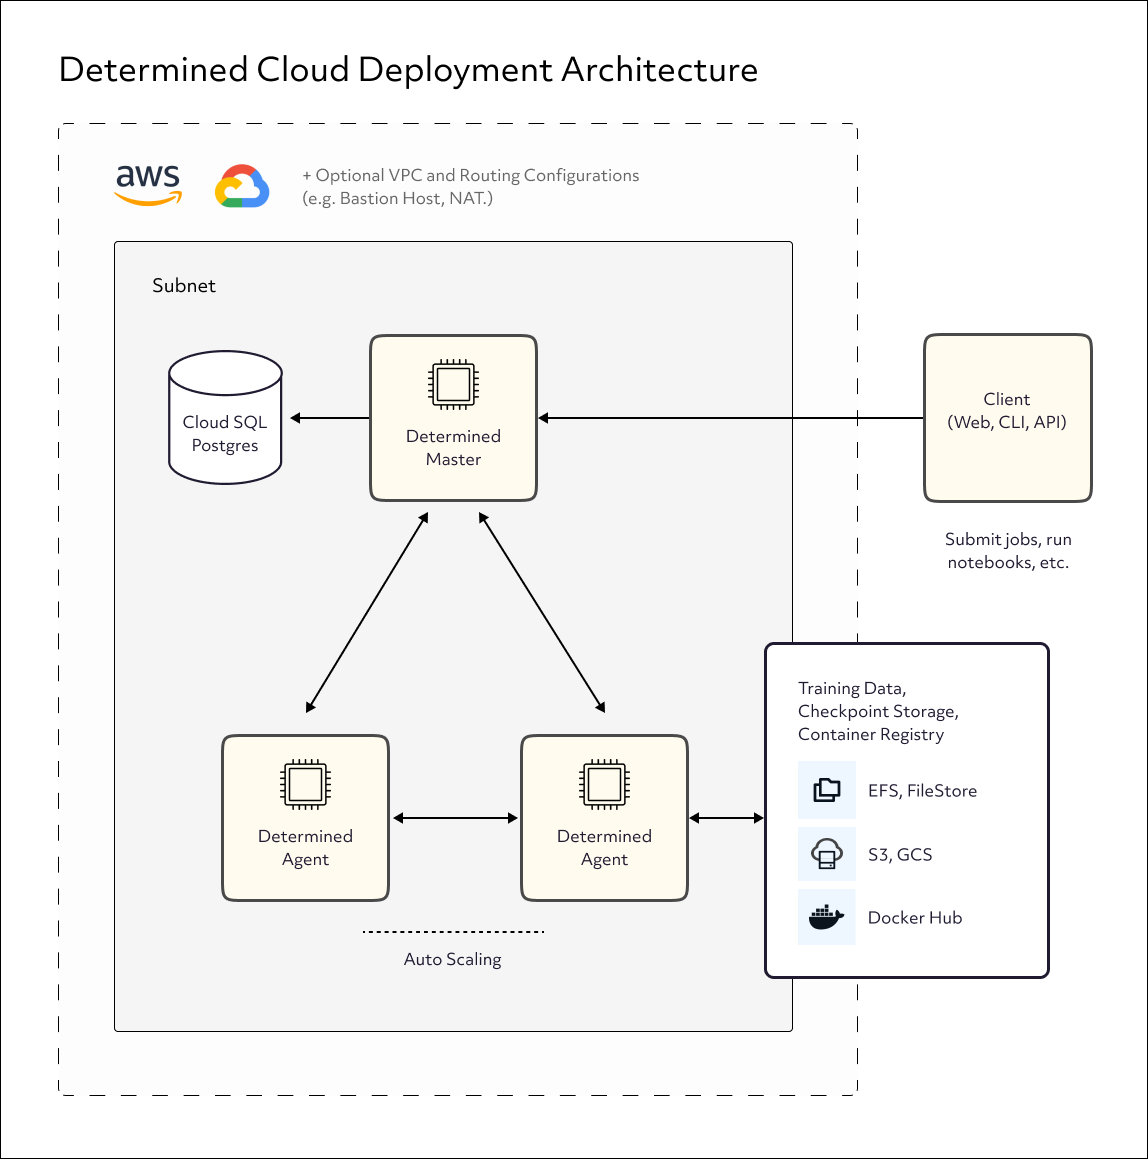 Diagram showing Determined Cloud Deployment Architecture on GCP